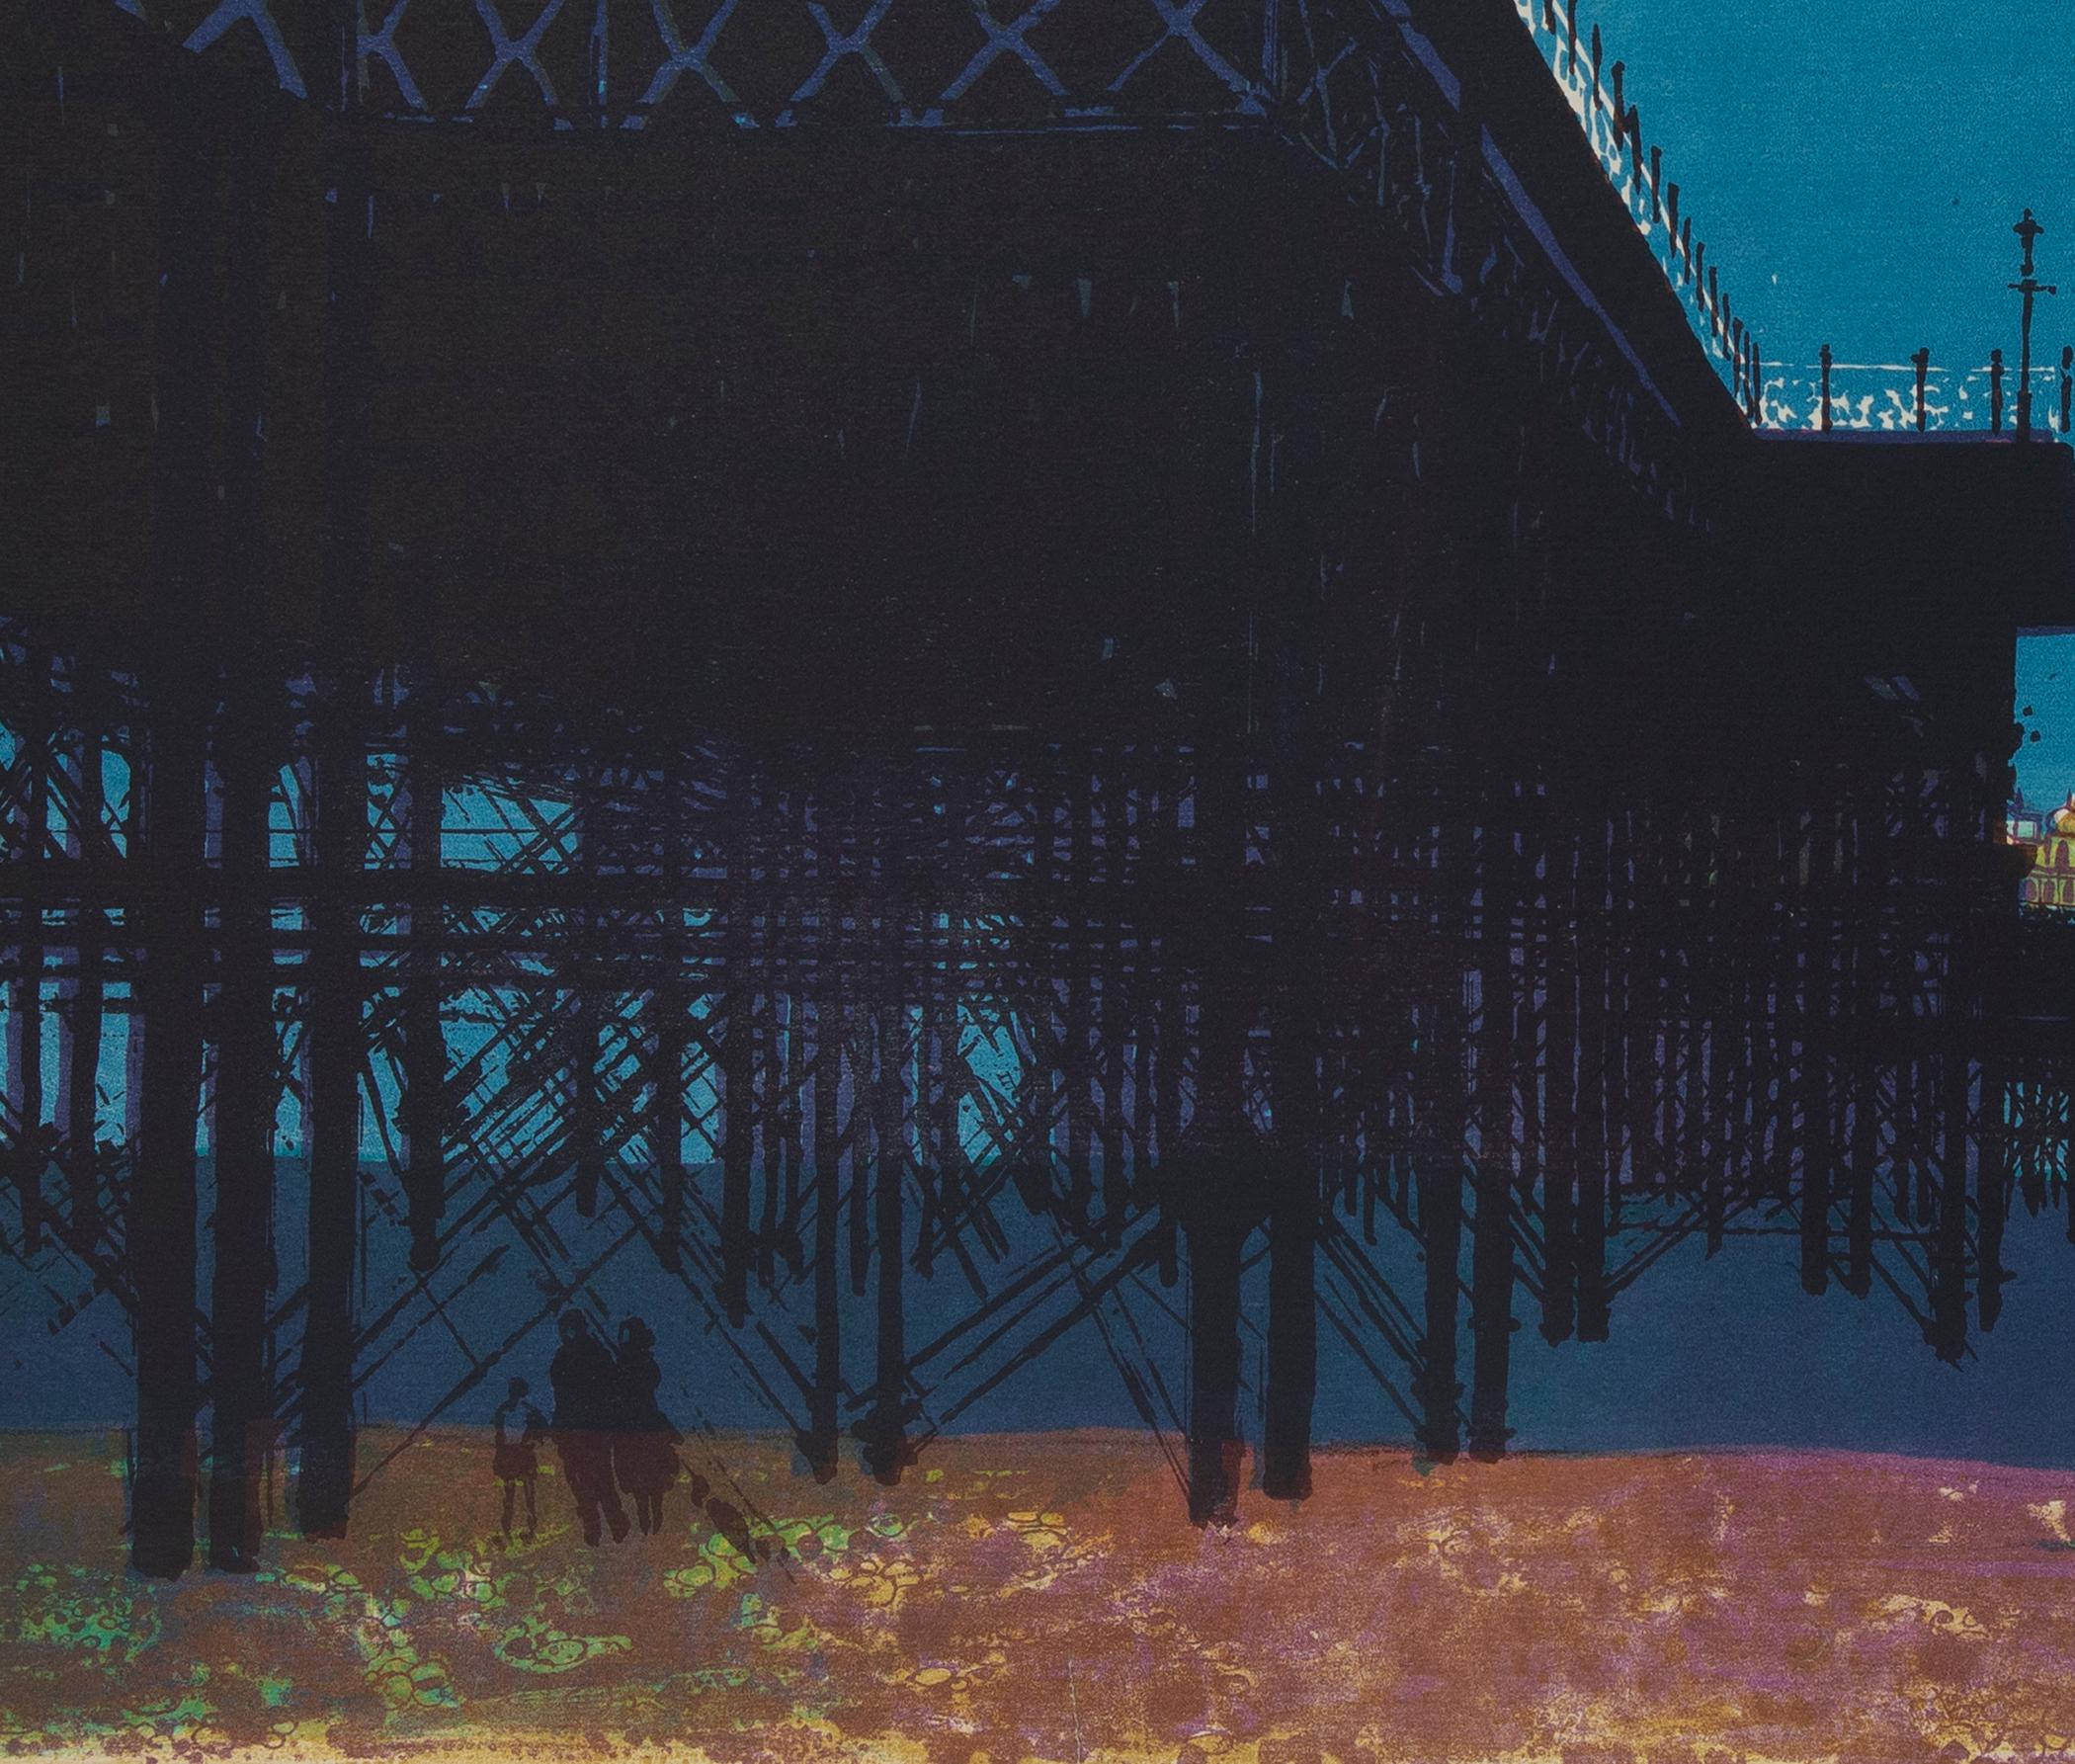 ’Palace Pier’ Brighton
By Bernard Brett
Medium - Lithograph
Edition - Studio proof
Signed - No
Published by - Curwen Press
Size - 615mm x 435mm
Date - C1975
Condition - Reasonable. 8 out of 10. Some small repaired tears to edge. Not affecting